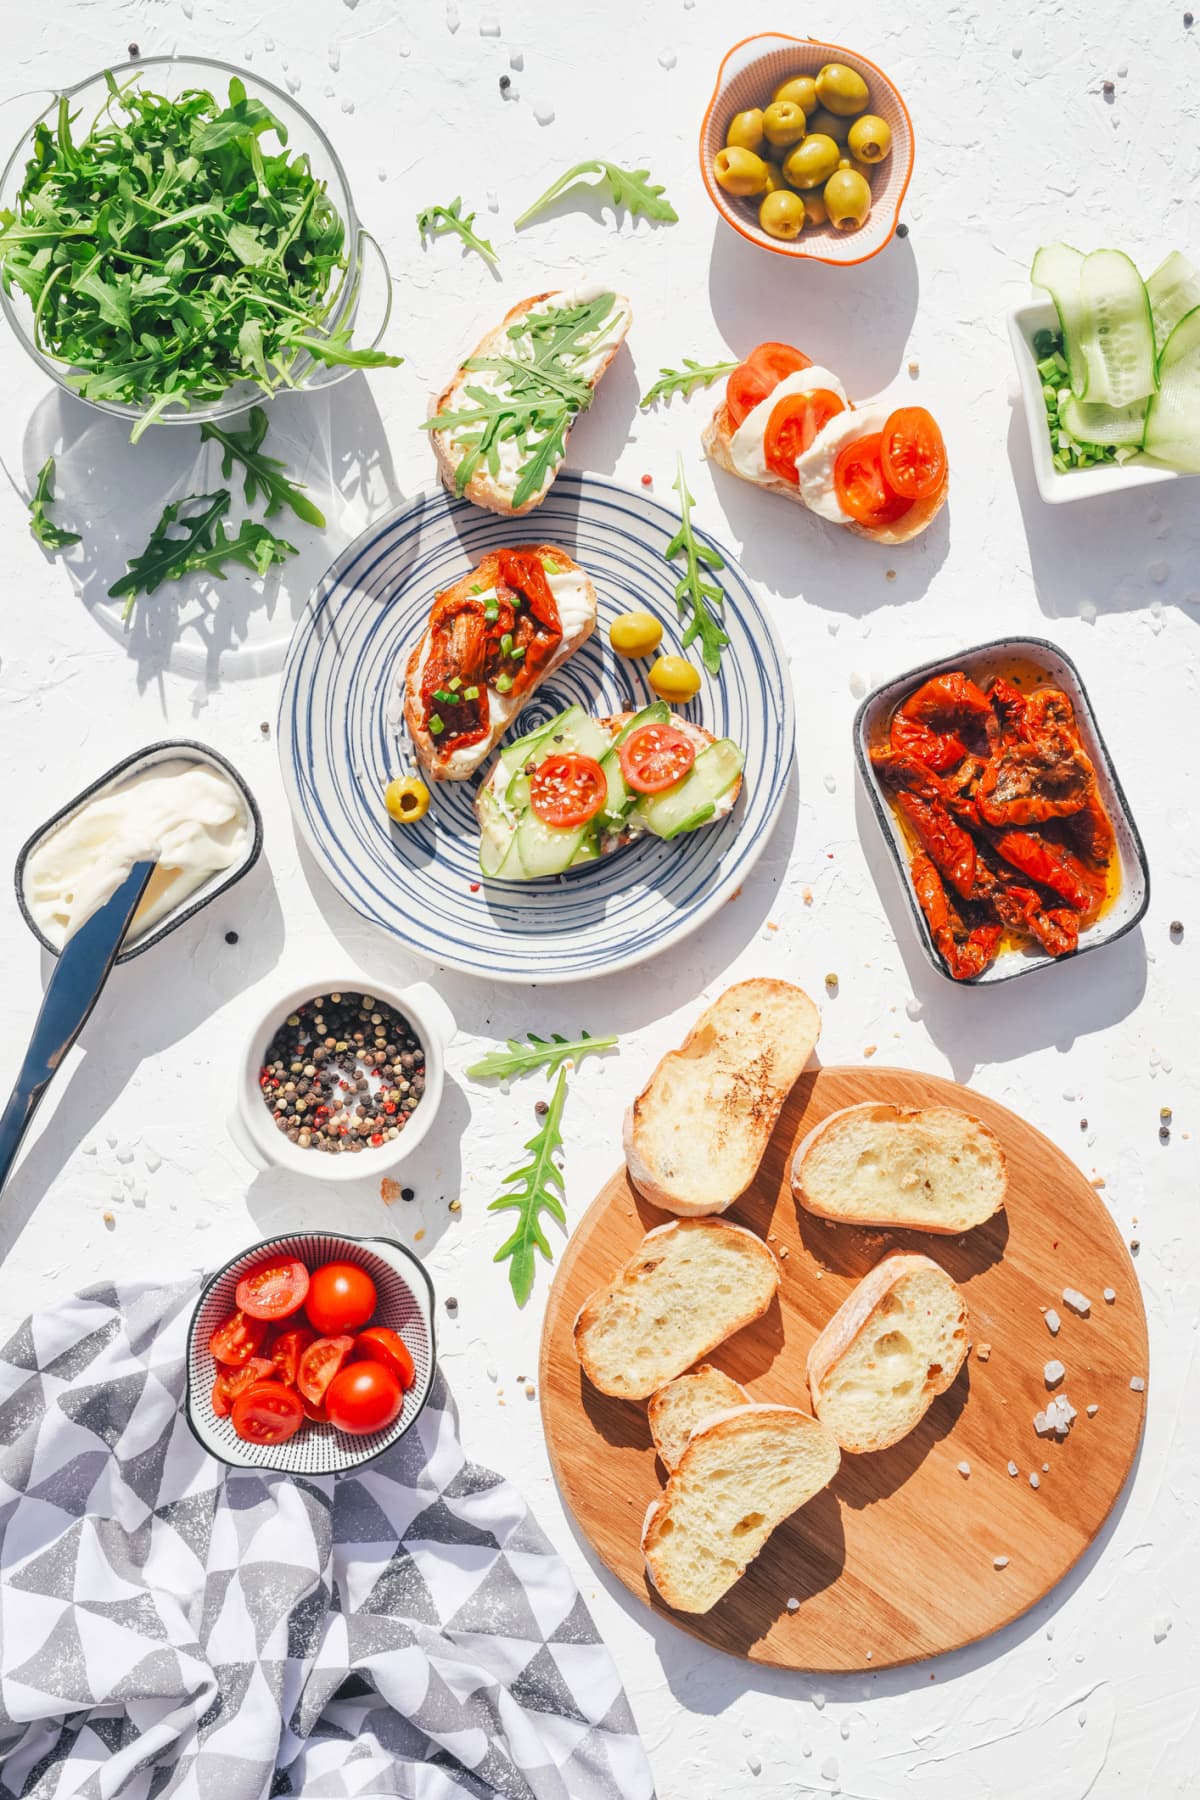 A variety of healthy toasts with vegetables, seeds and microgreens. Colorful, plant-based vegan snacks.